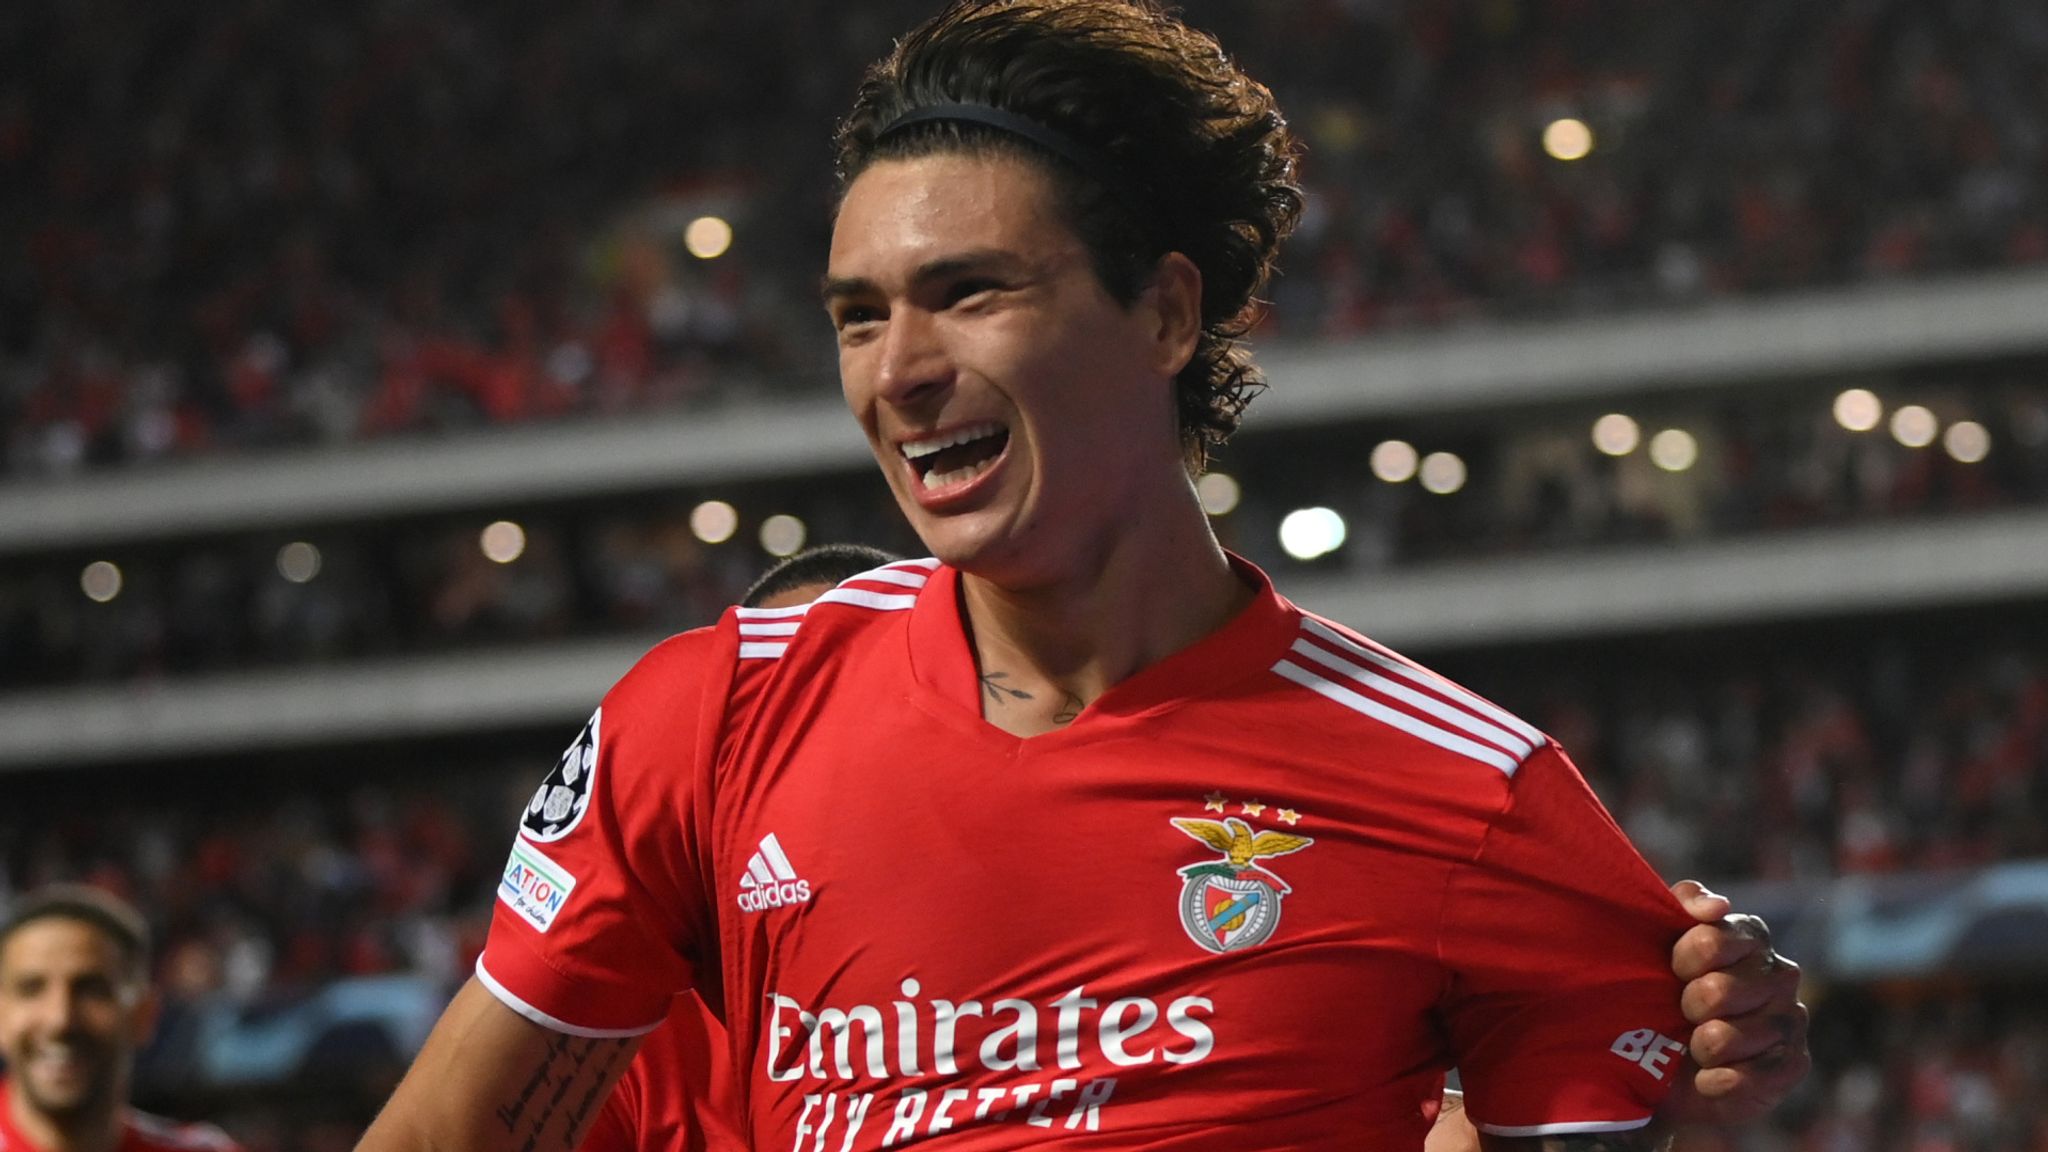 Darwin Nunez: West Ham hoping to complete move for Benfica striker